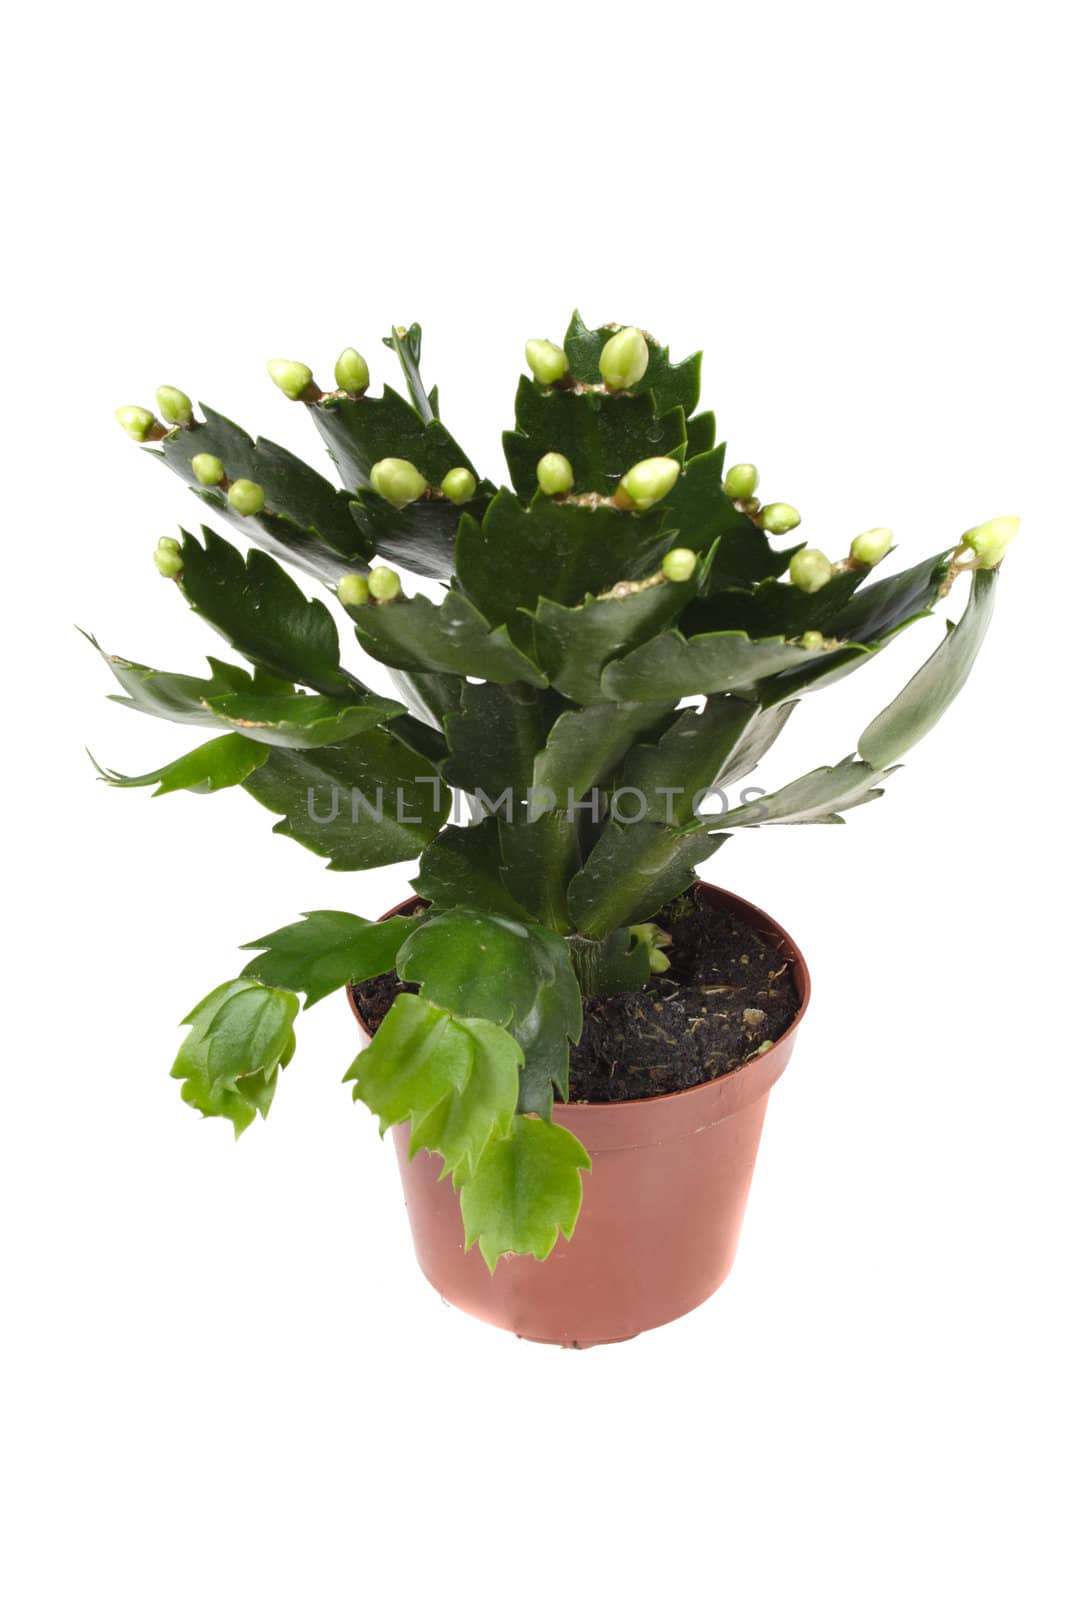 zygocactus in flower-pot, photo on the white background